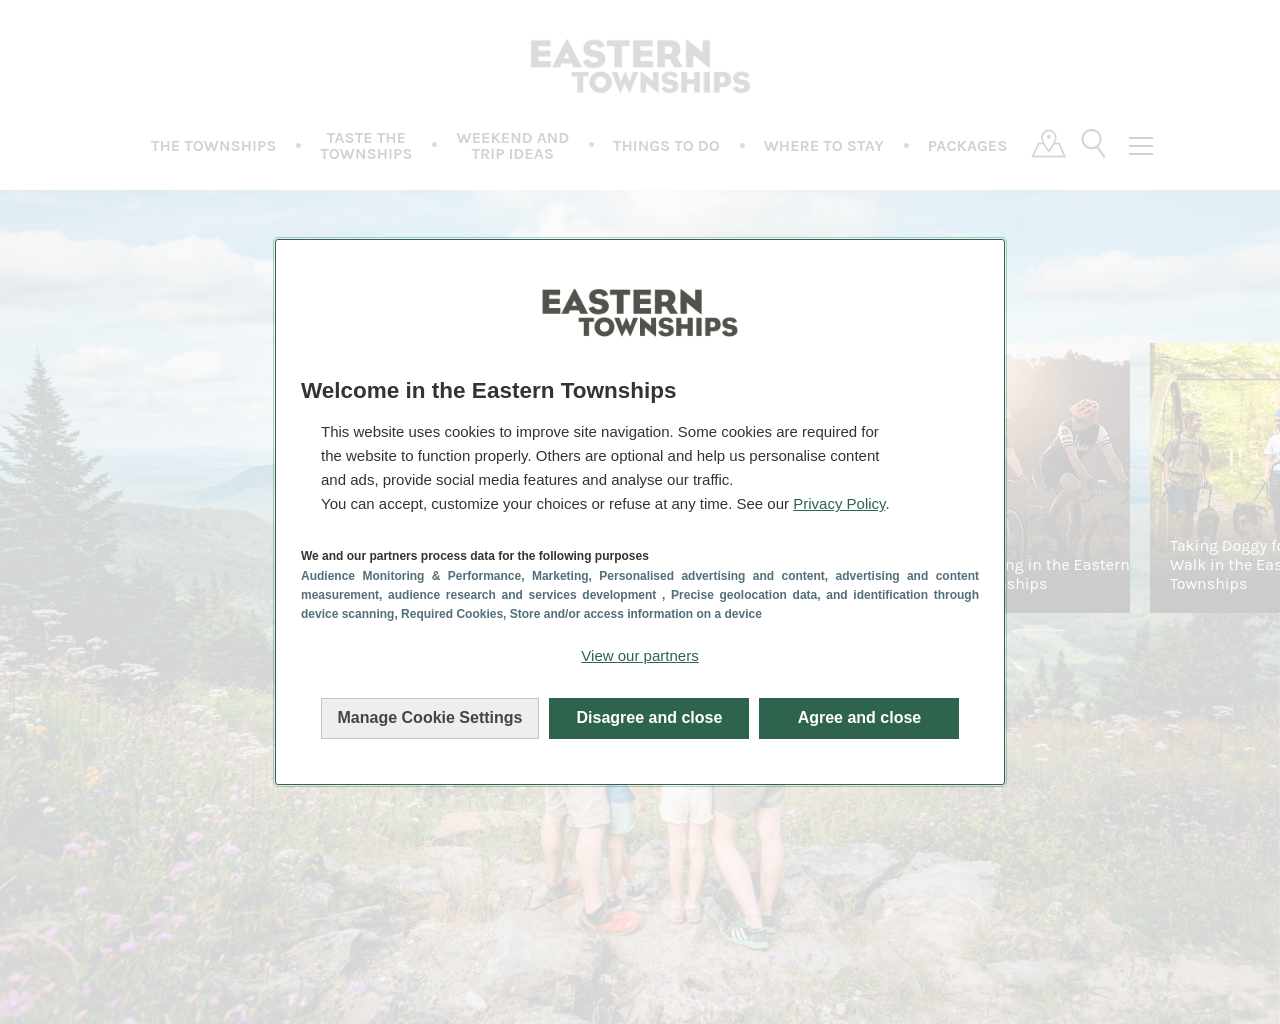 easterntownships.org